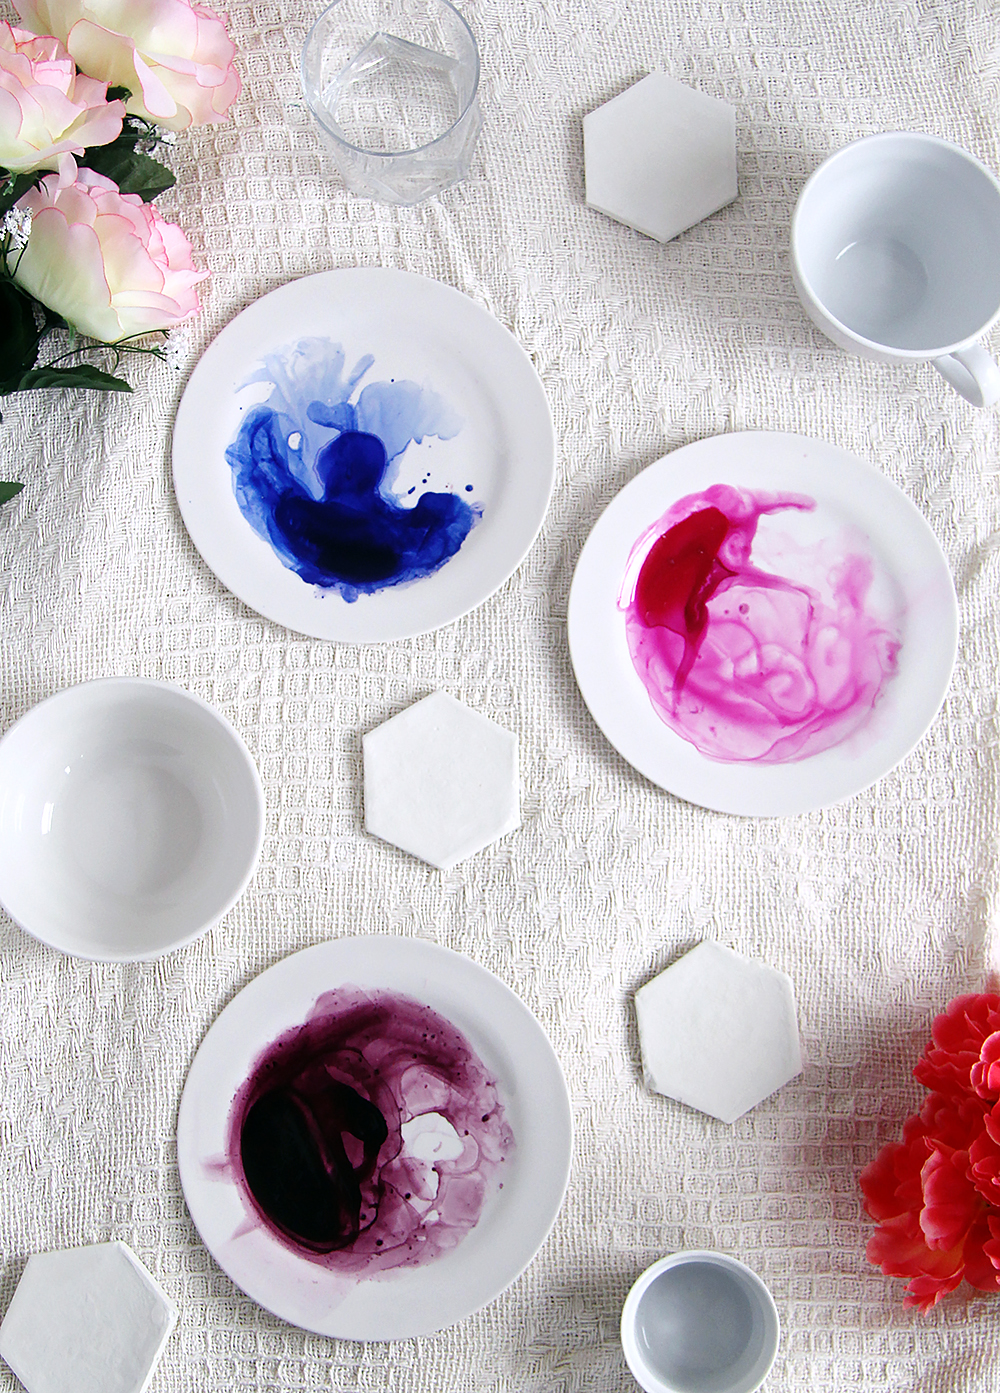 DIY Watercolor Plates - Modern Painted Plates - Make these Plates | Small for Big